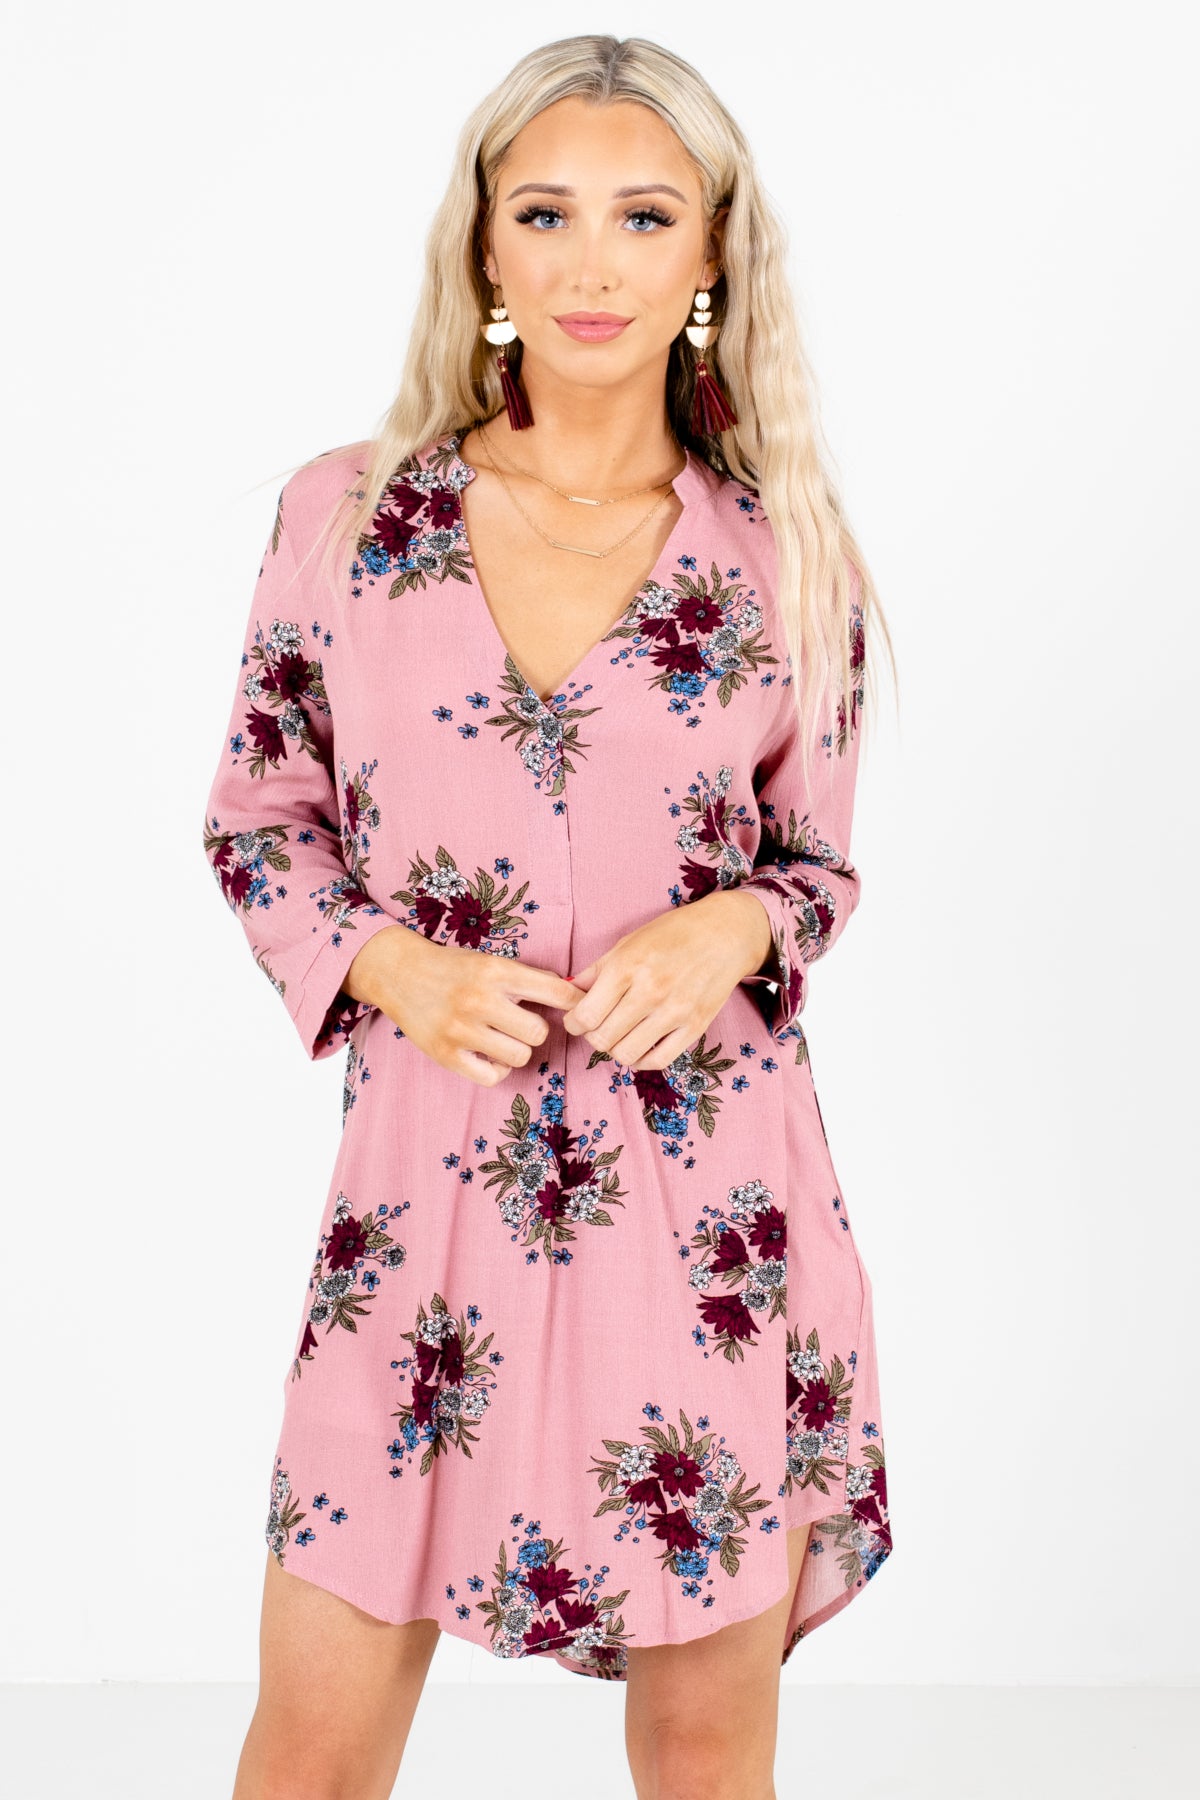 Pink High-Quality Lightweight Material Boutique Mini Dresses for Women